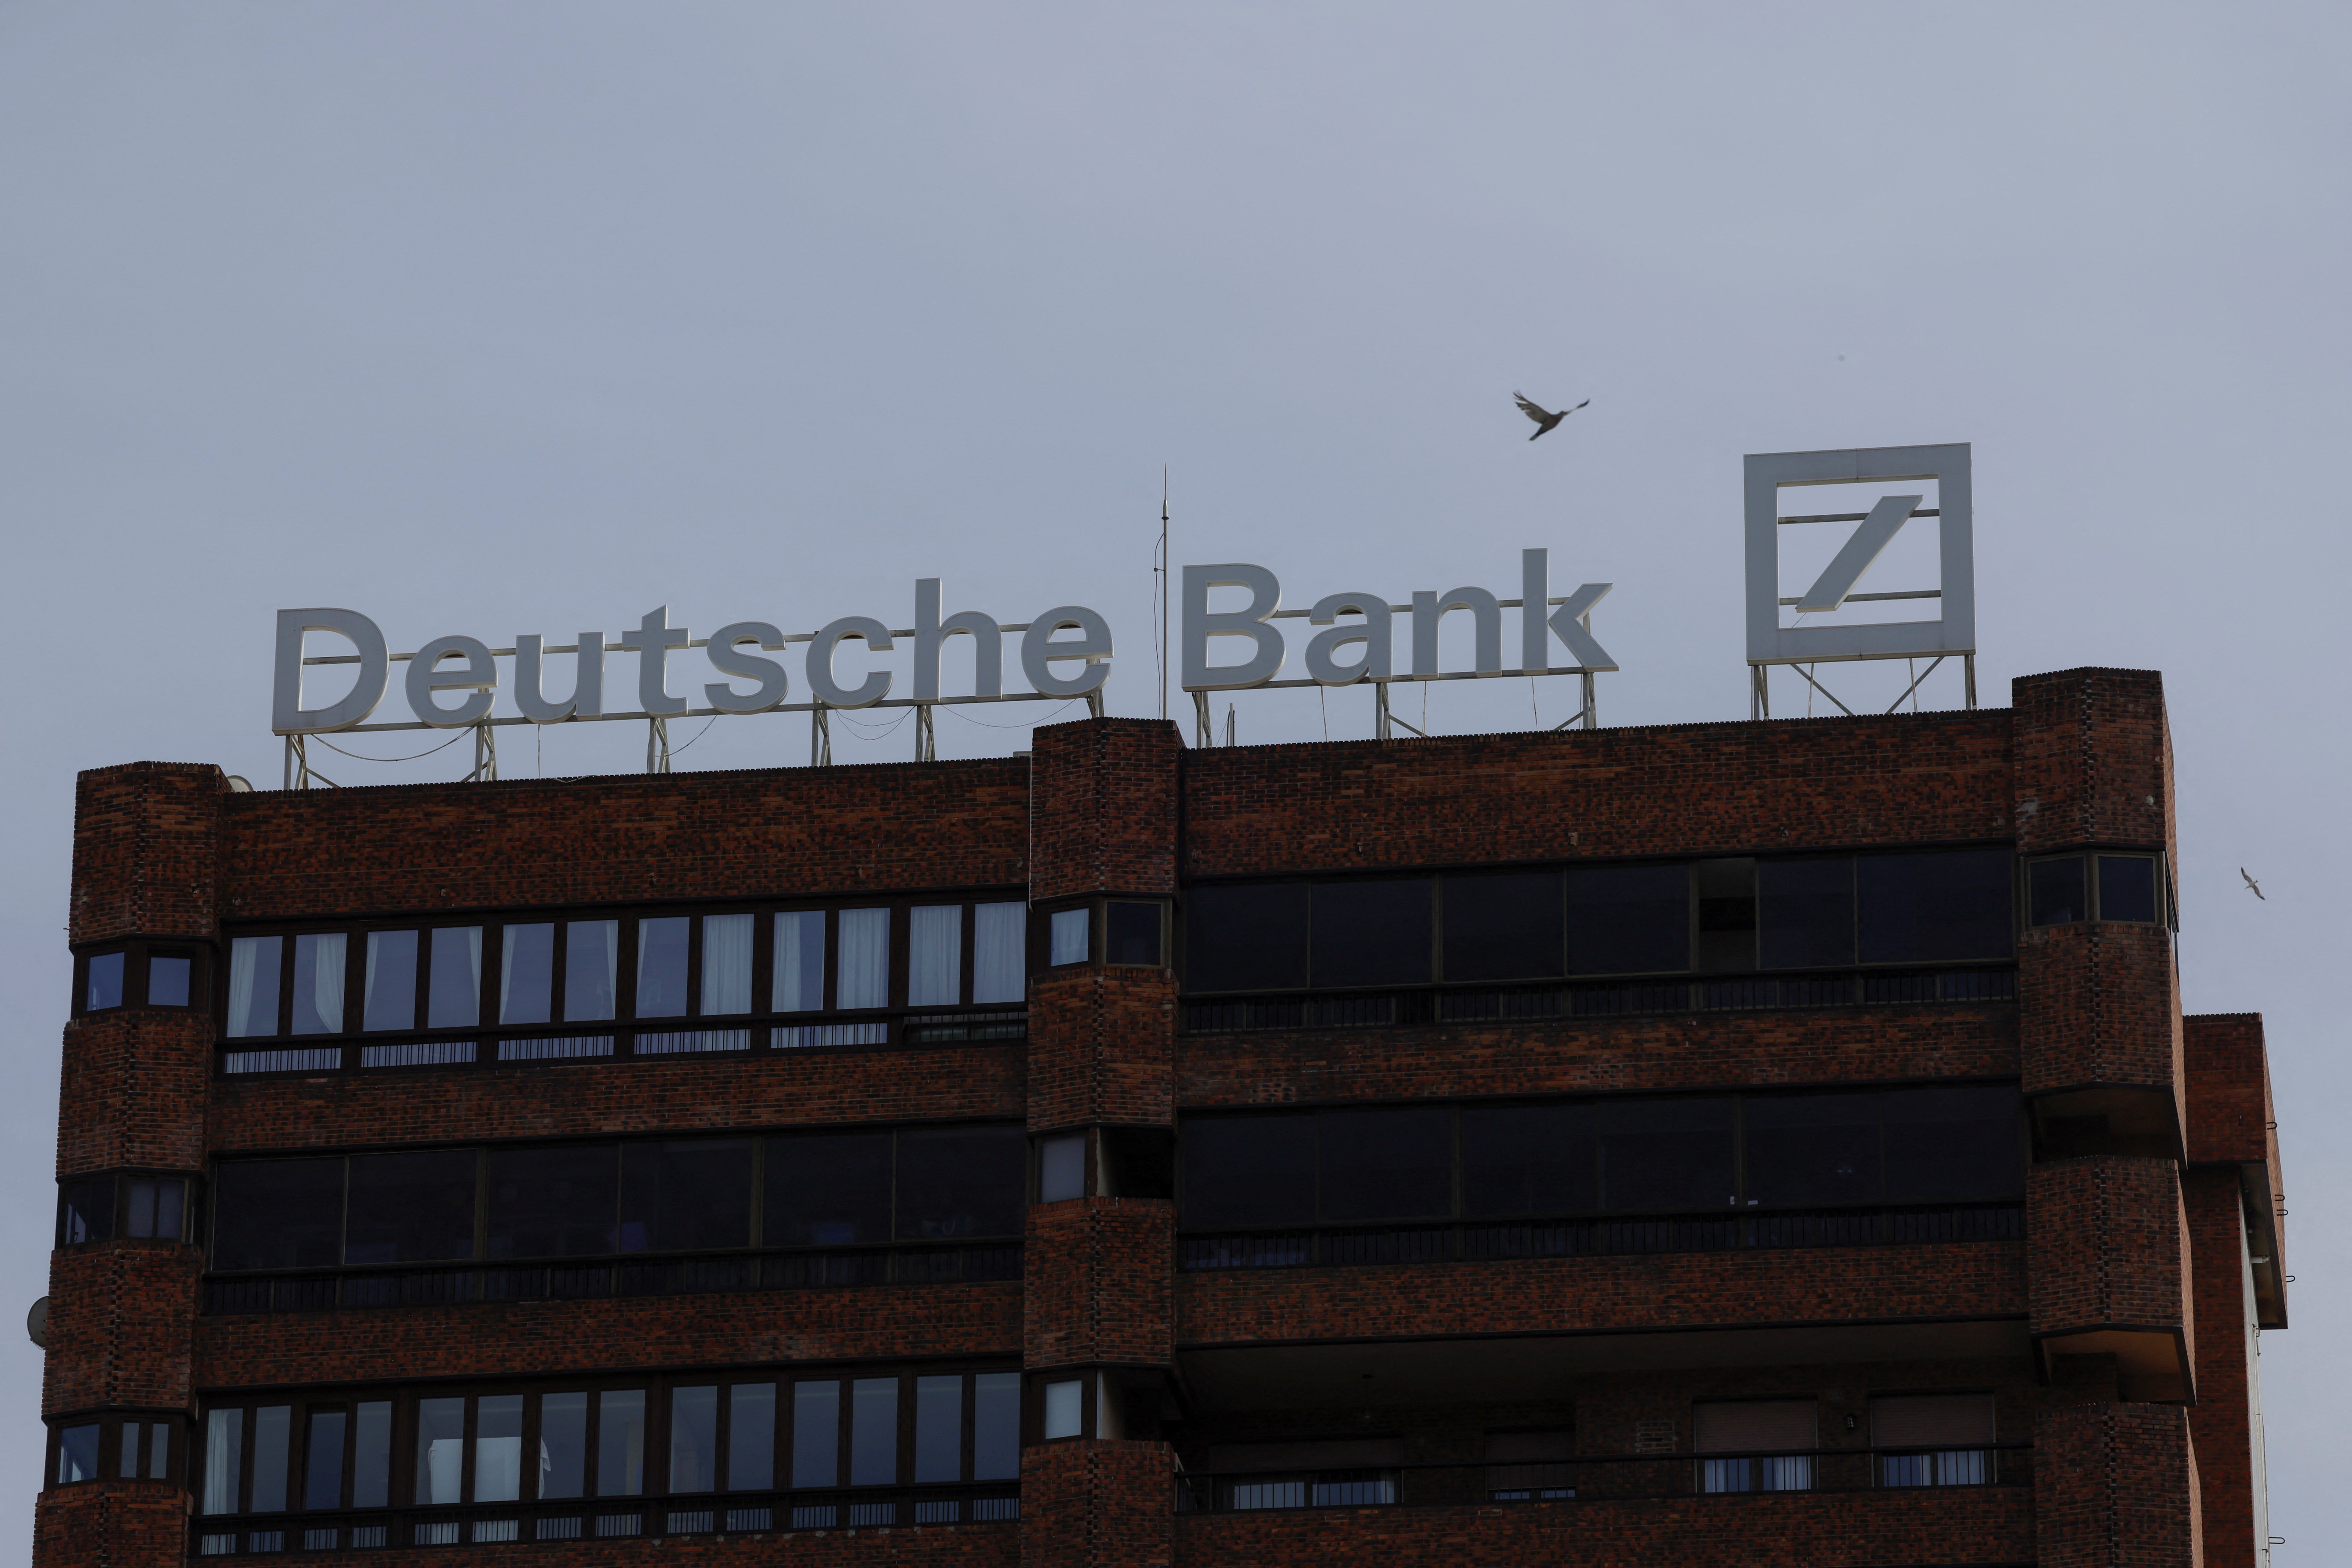 The logo of Deutsche Bank is seen on the roof of a building outside a Deutsche Bank branch office in Malaga